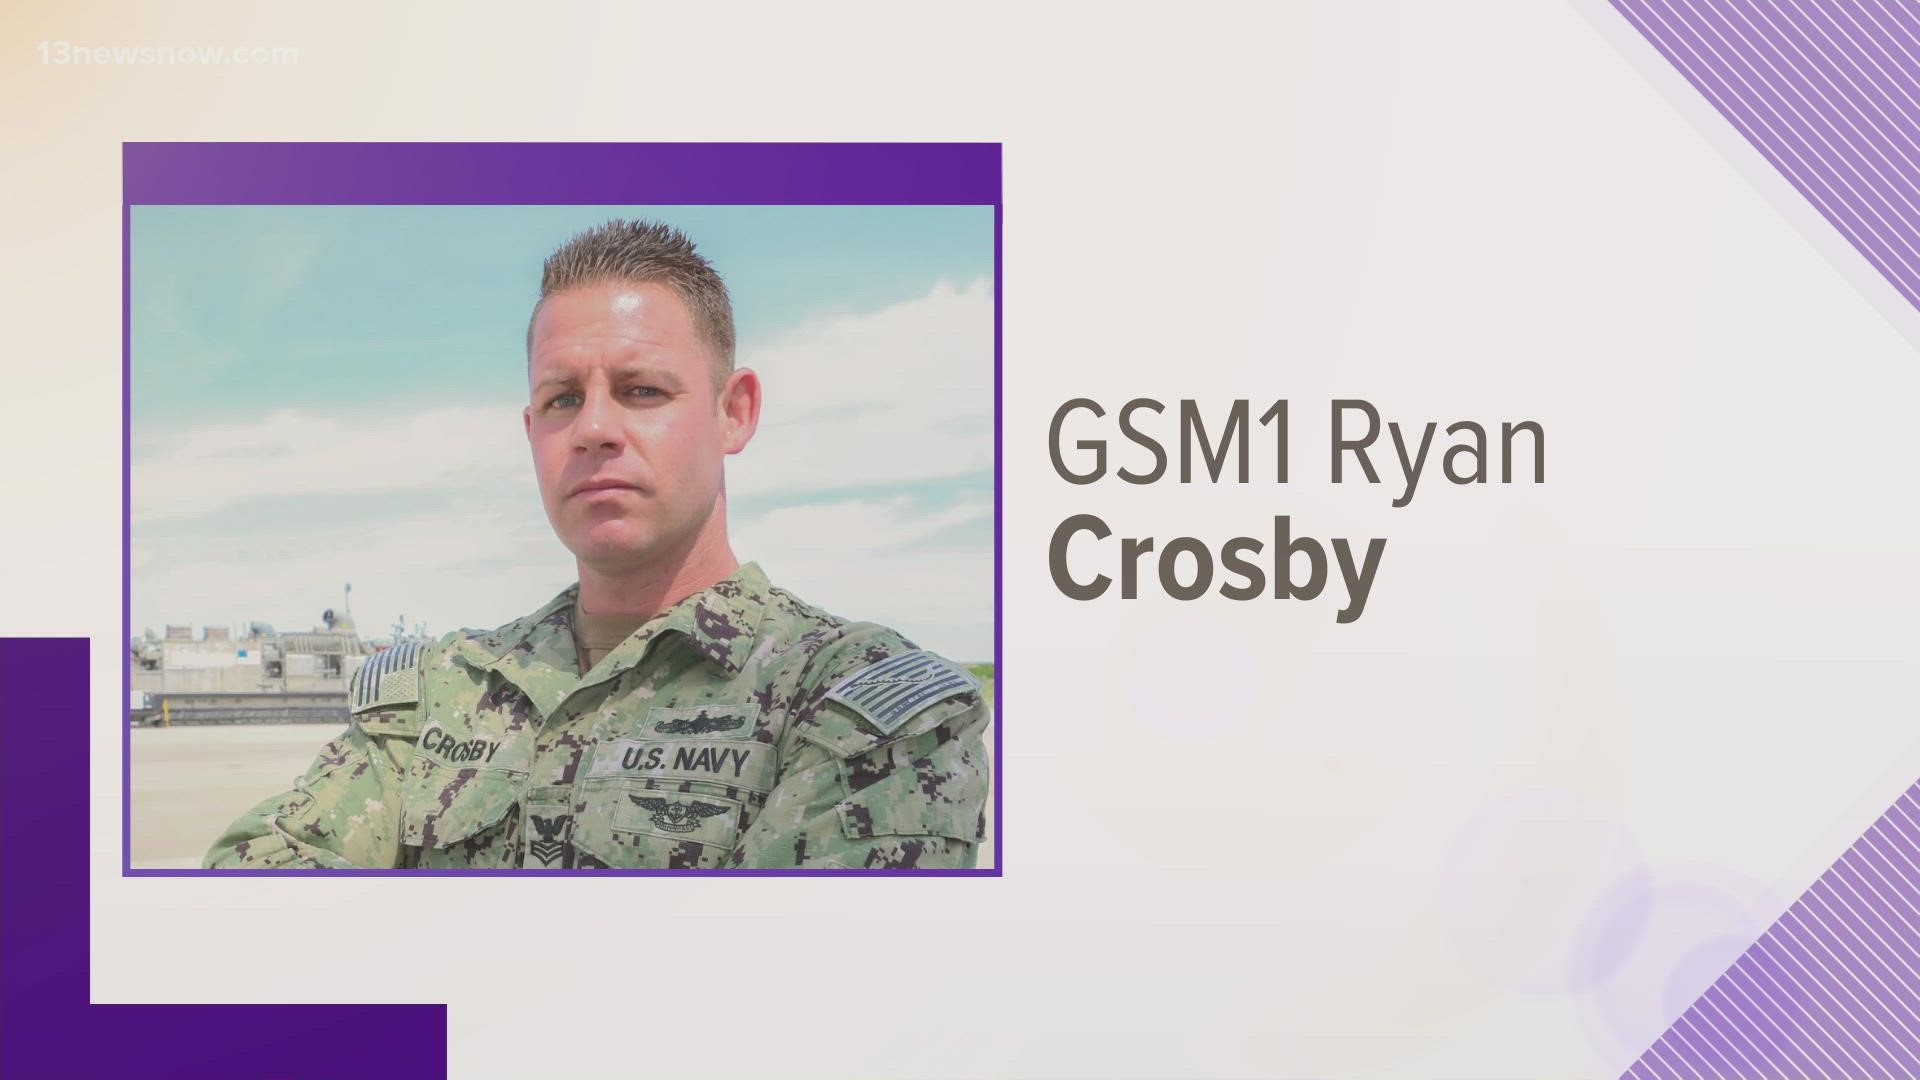 Gas Turbine System Technician 1st Class, Ryan Crosby, is one of fewer than 50 service members who have died from the disease since 2020.